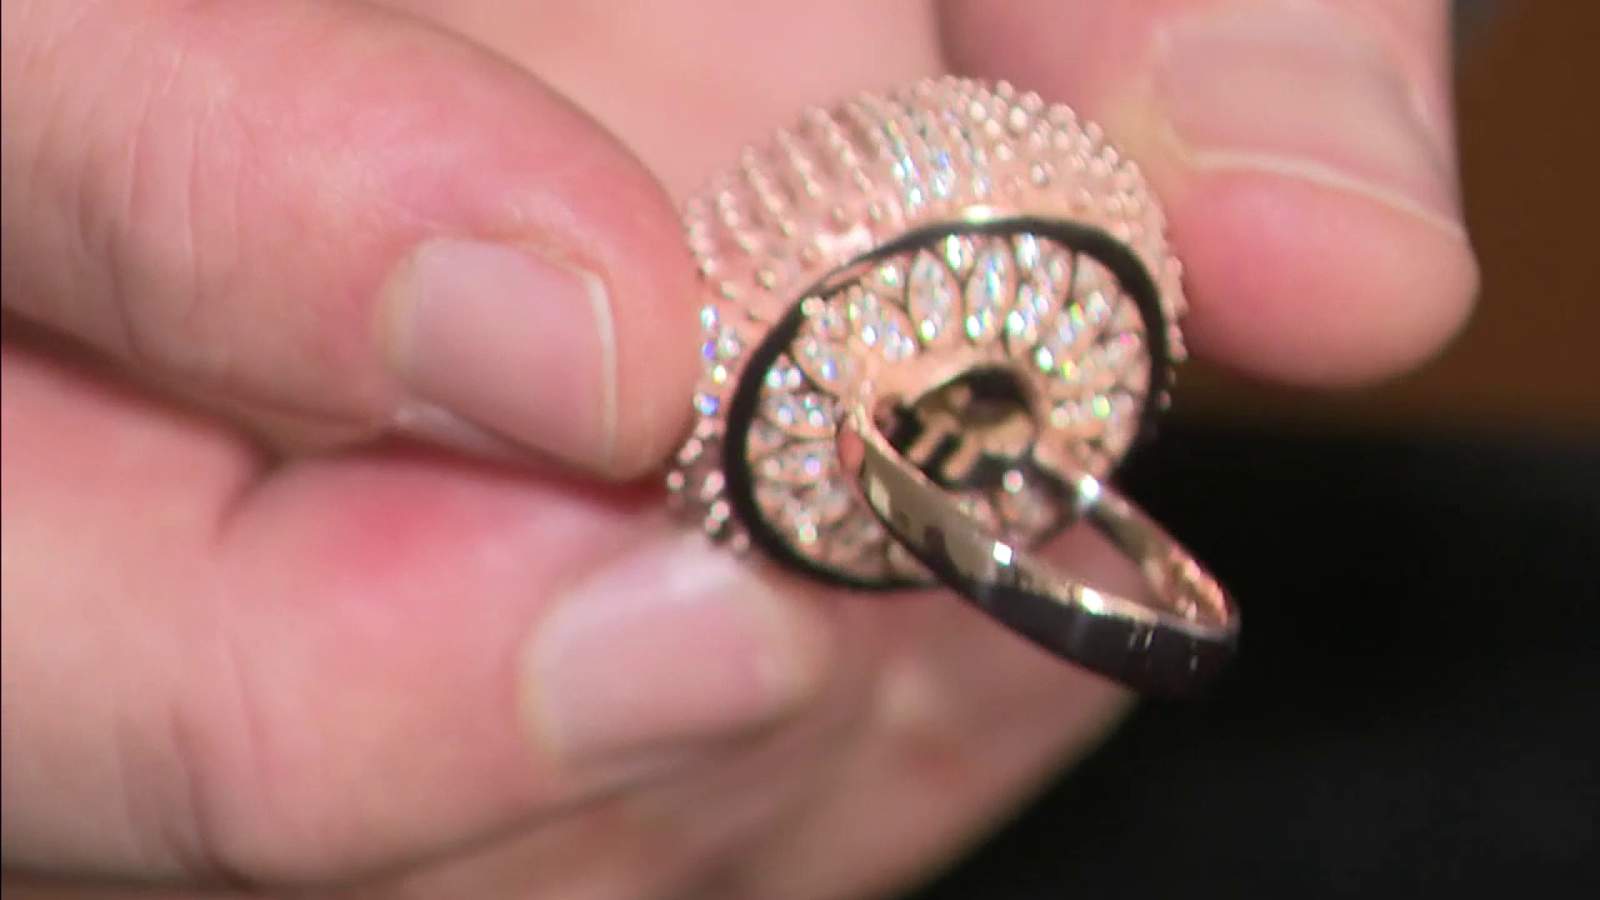 To honor his wife, widower creates ring to raise funds for breast cancer cure